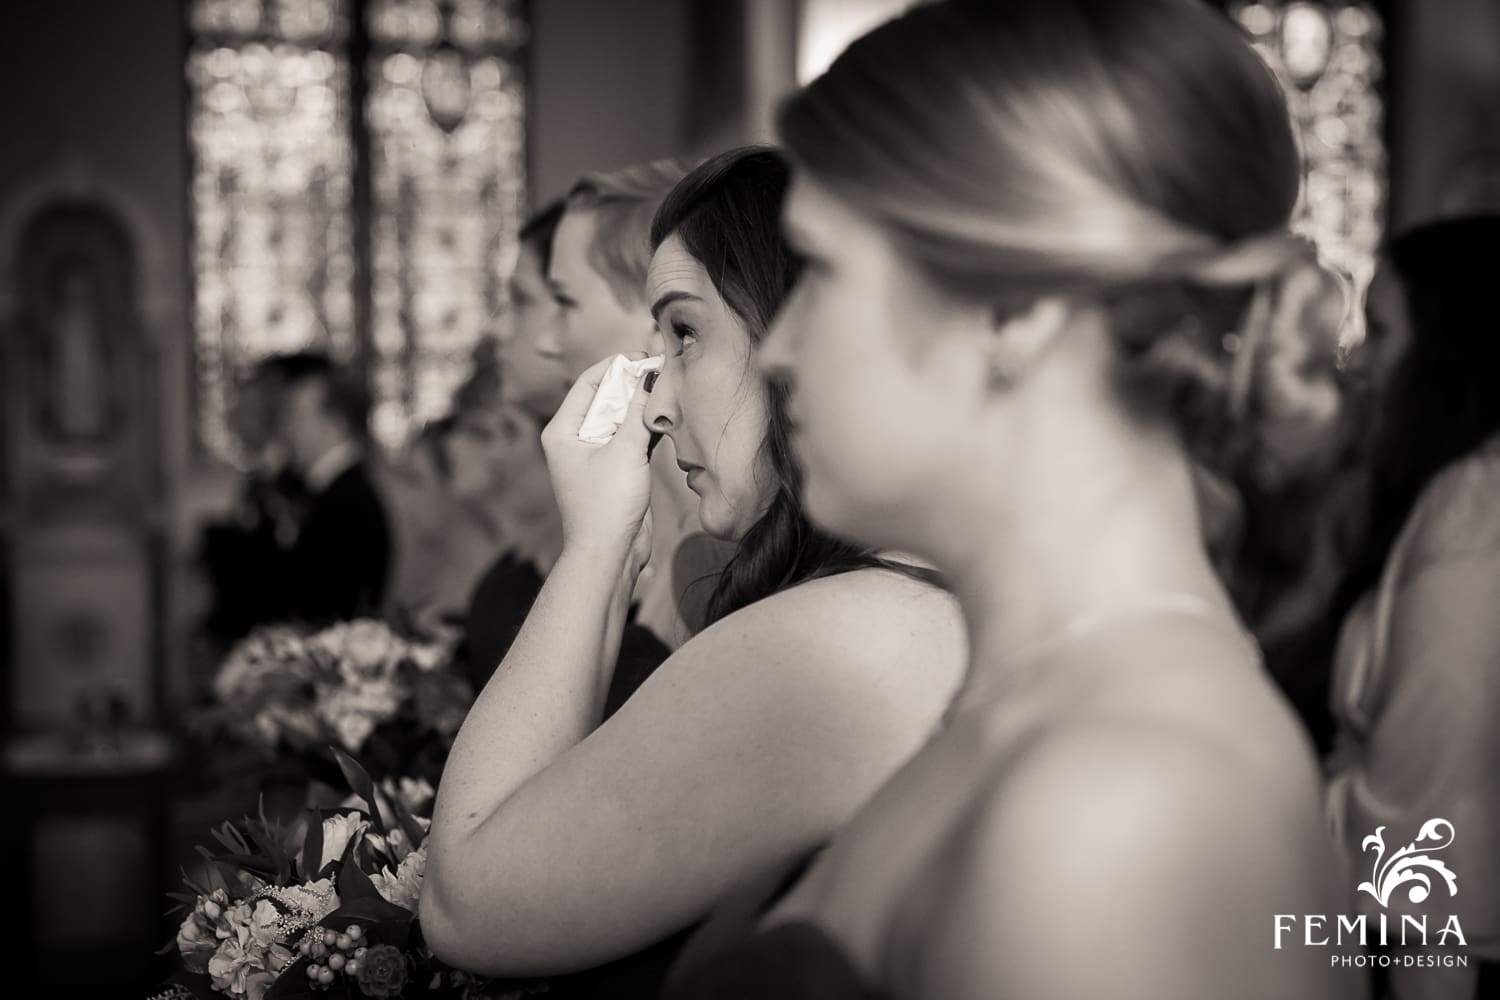 bridesmaid crying during ceremony